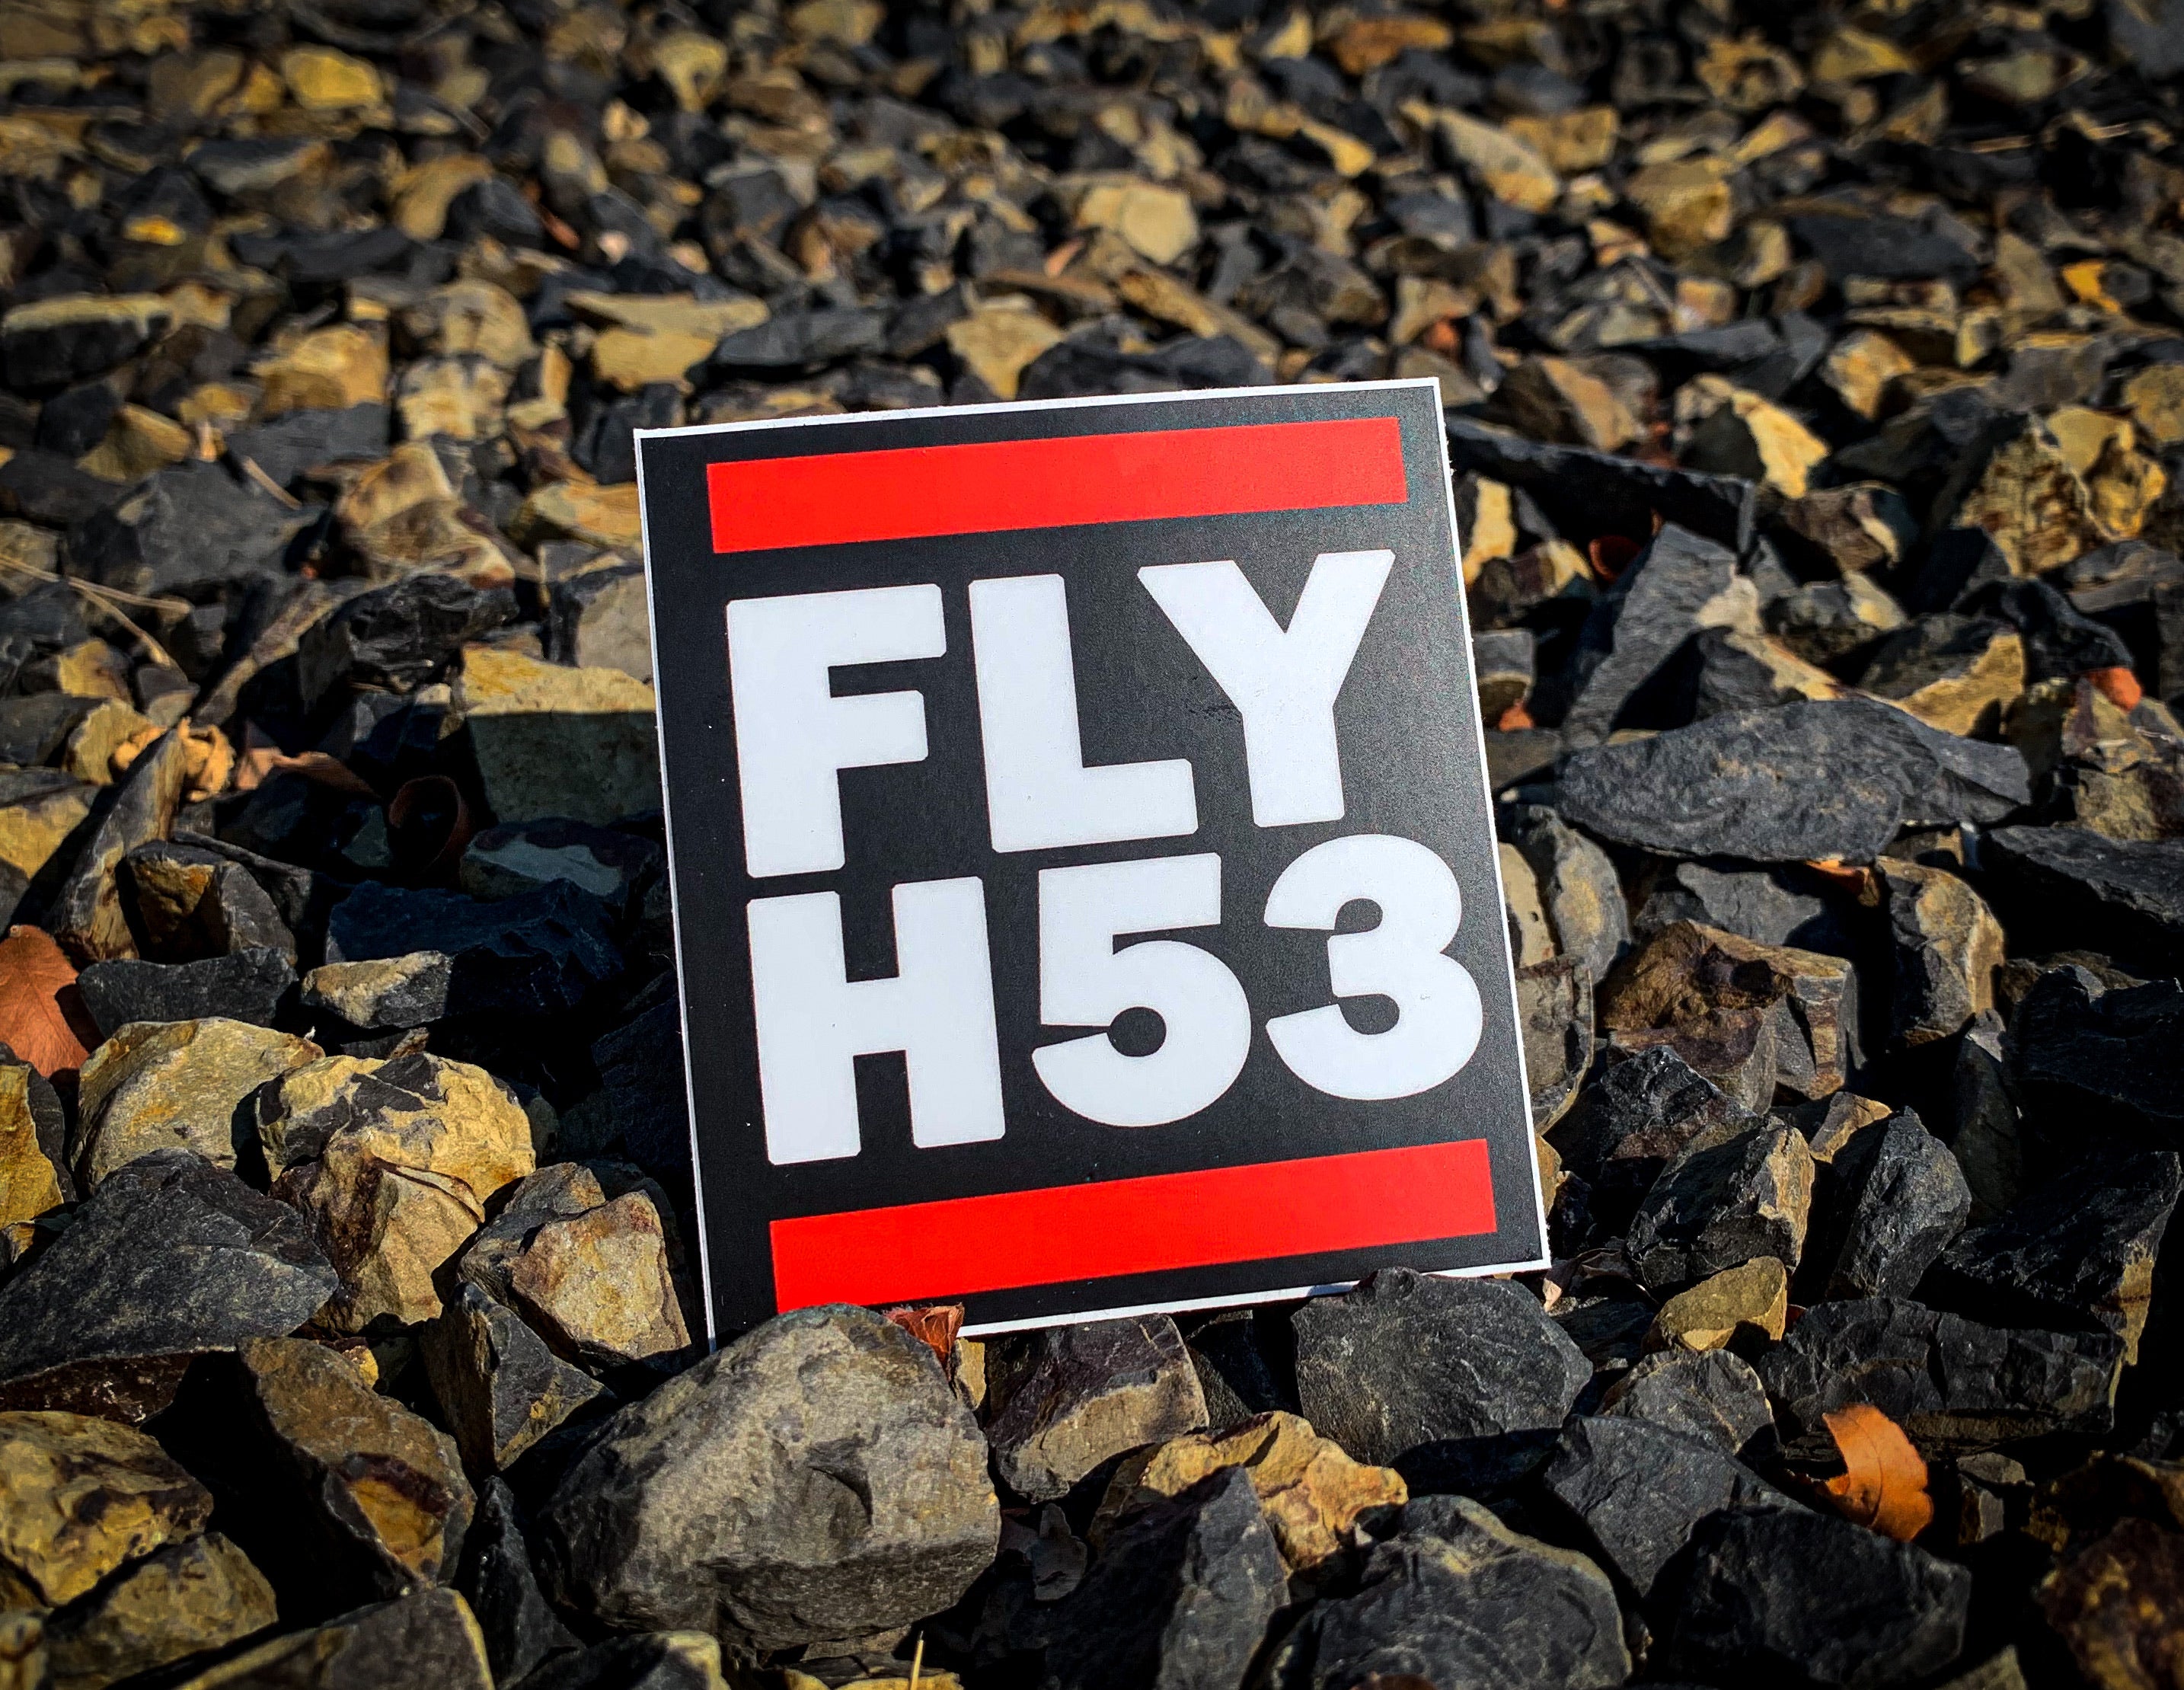 FLY H53